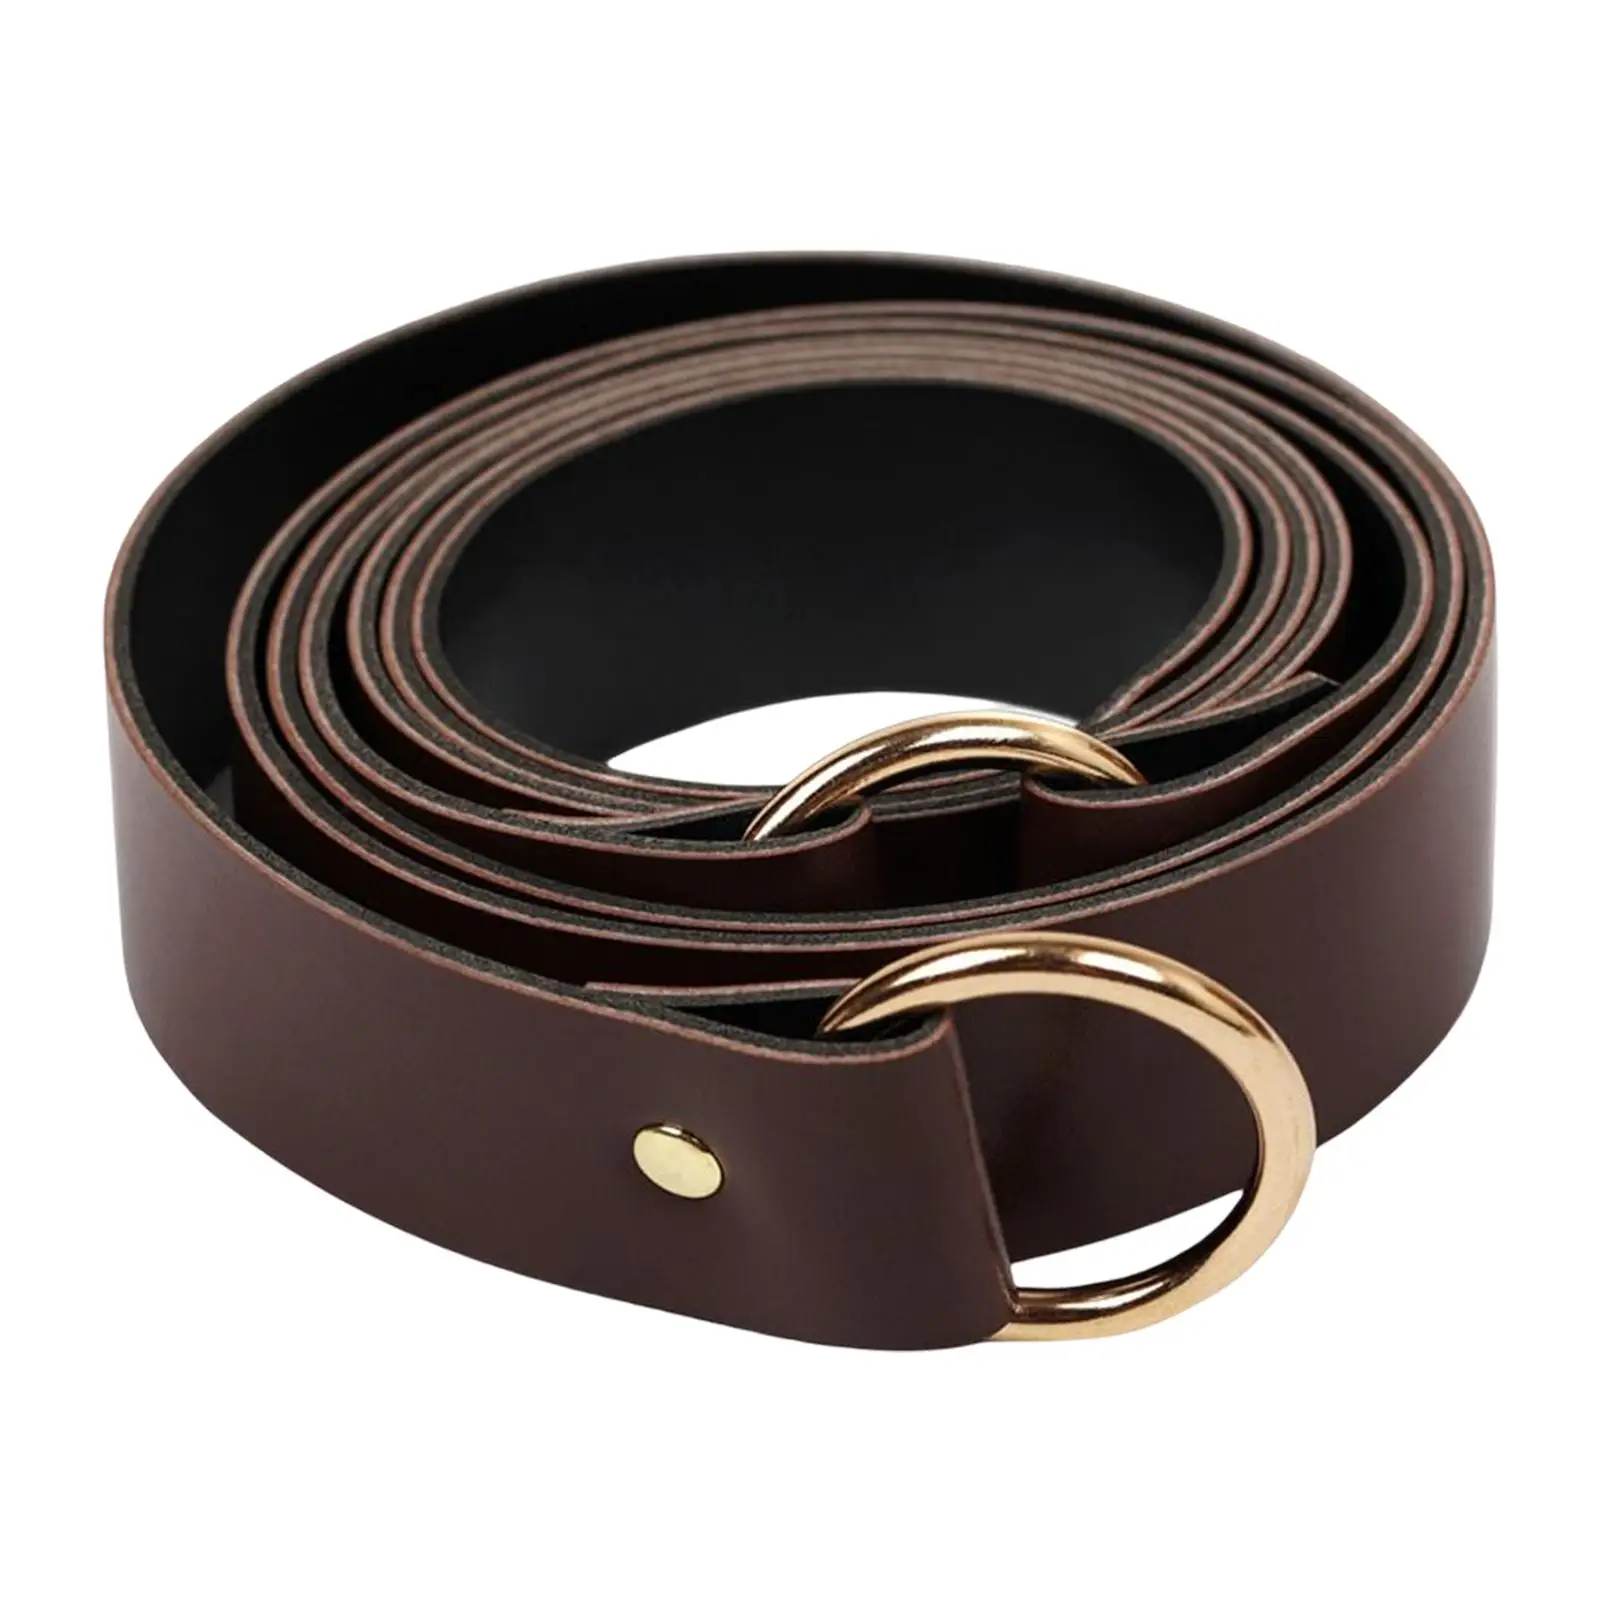 Knight Belt Decorative Fashion Multifunction Accessory PU Medieval Belt for Coats Formal Outfit Cosplay Shirts Men